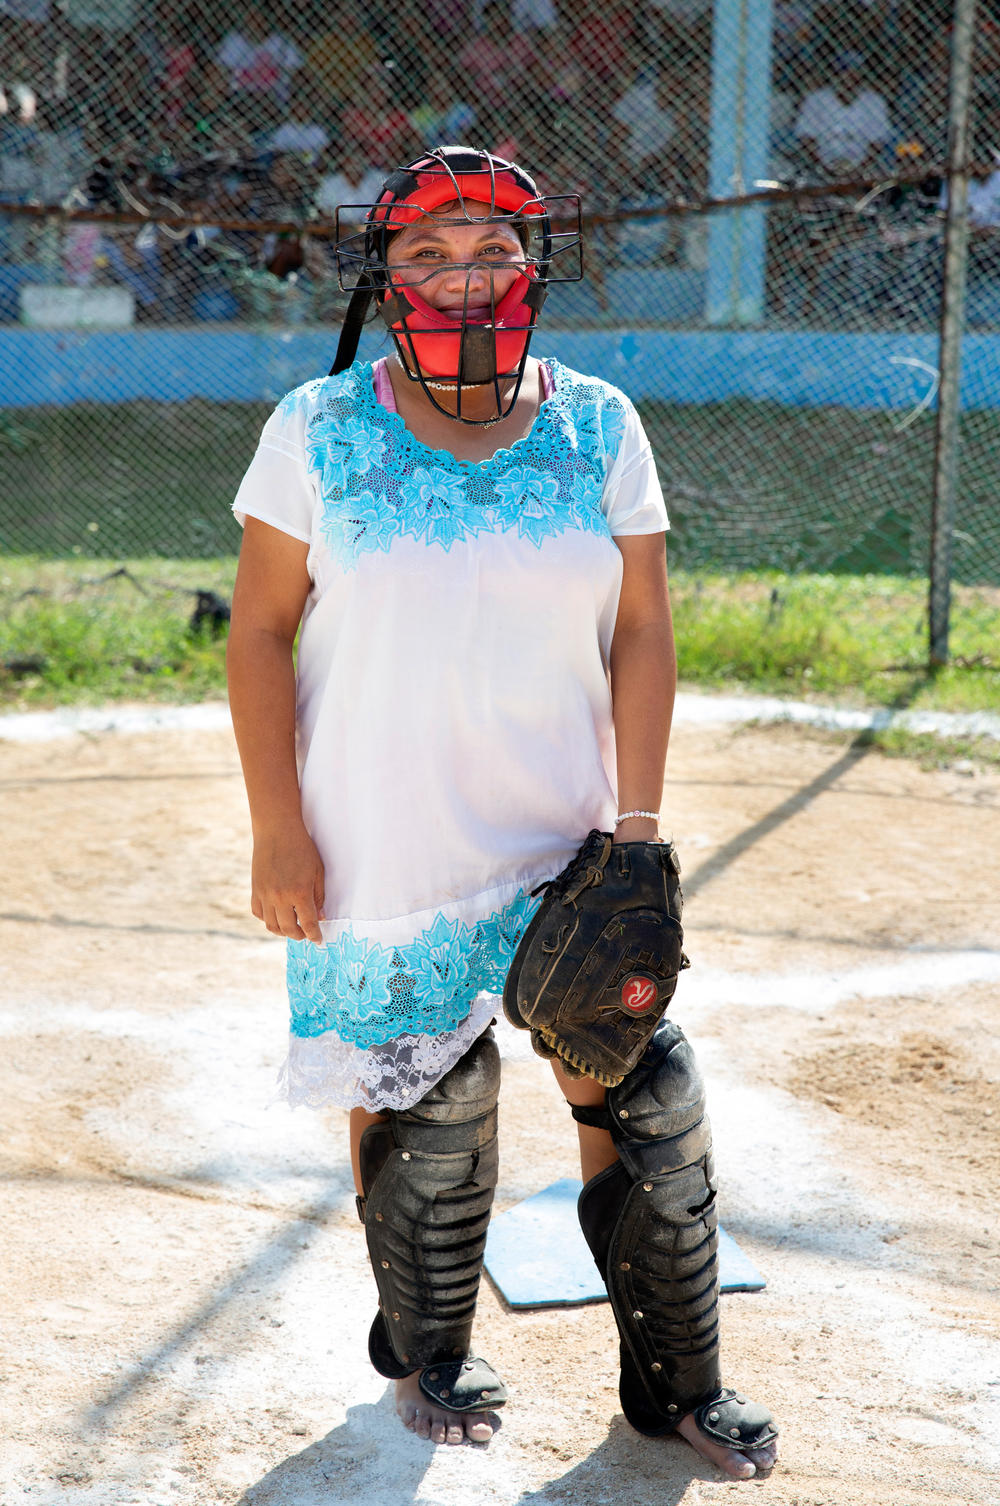 Jazmin Guadalupe Lopez Poot, 17, a player for the Amazonas of Yaxunah team, wears a faceguard with mask and shin pads as she takes on the role of catcher.